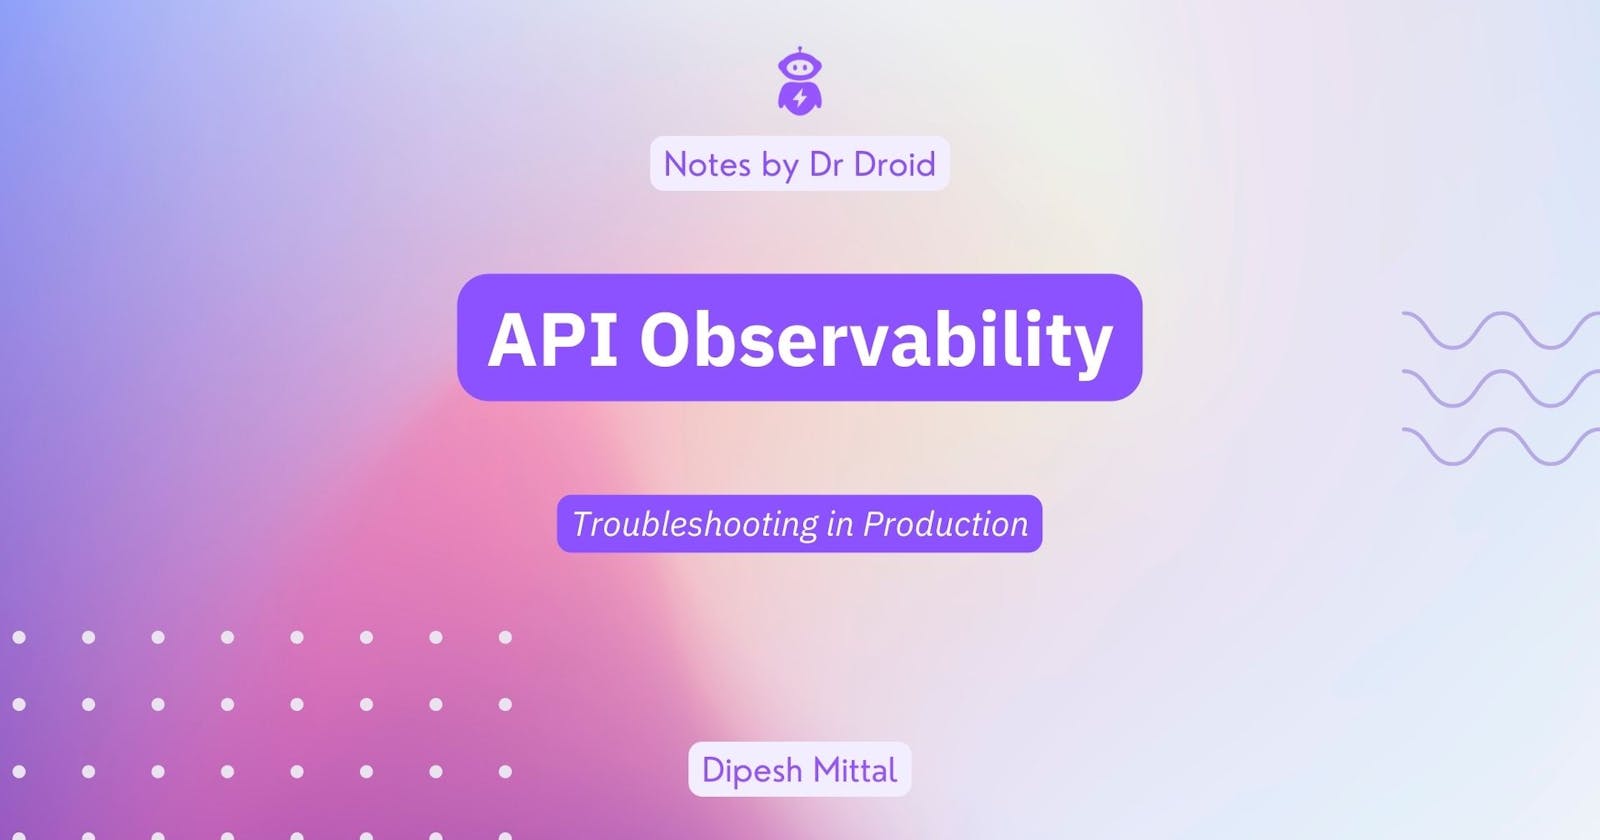 Observability of APIs in Production Environment